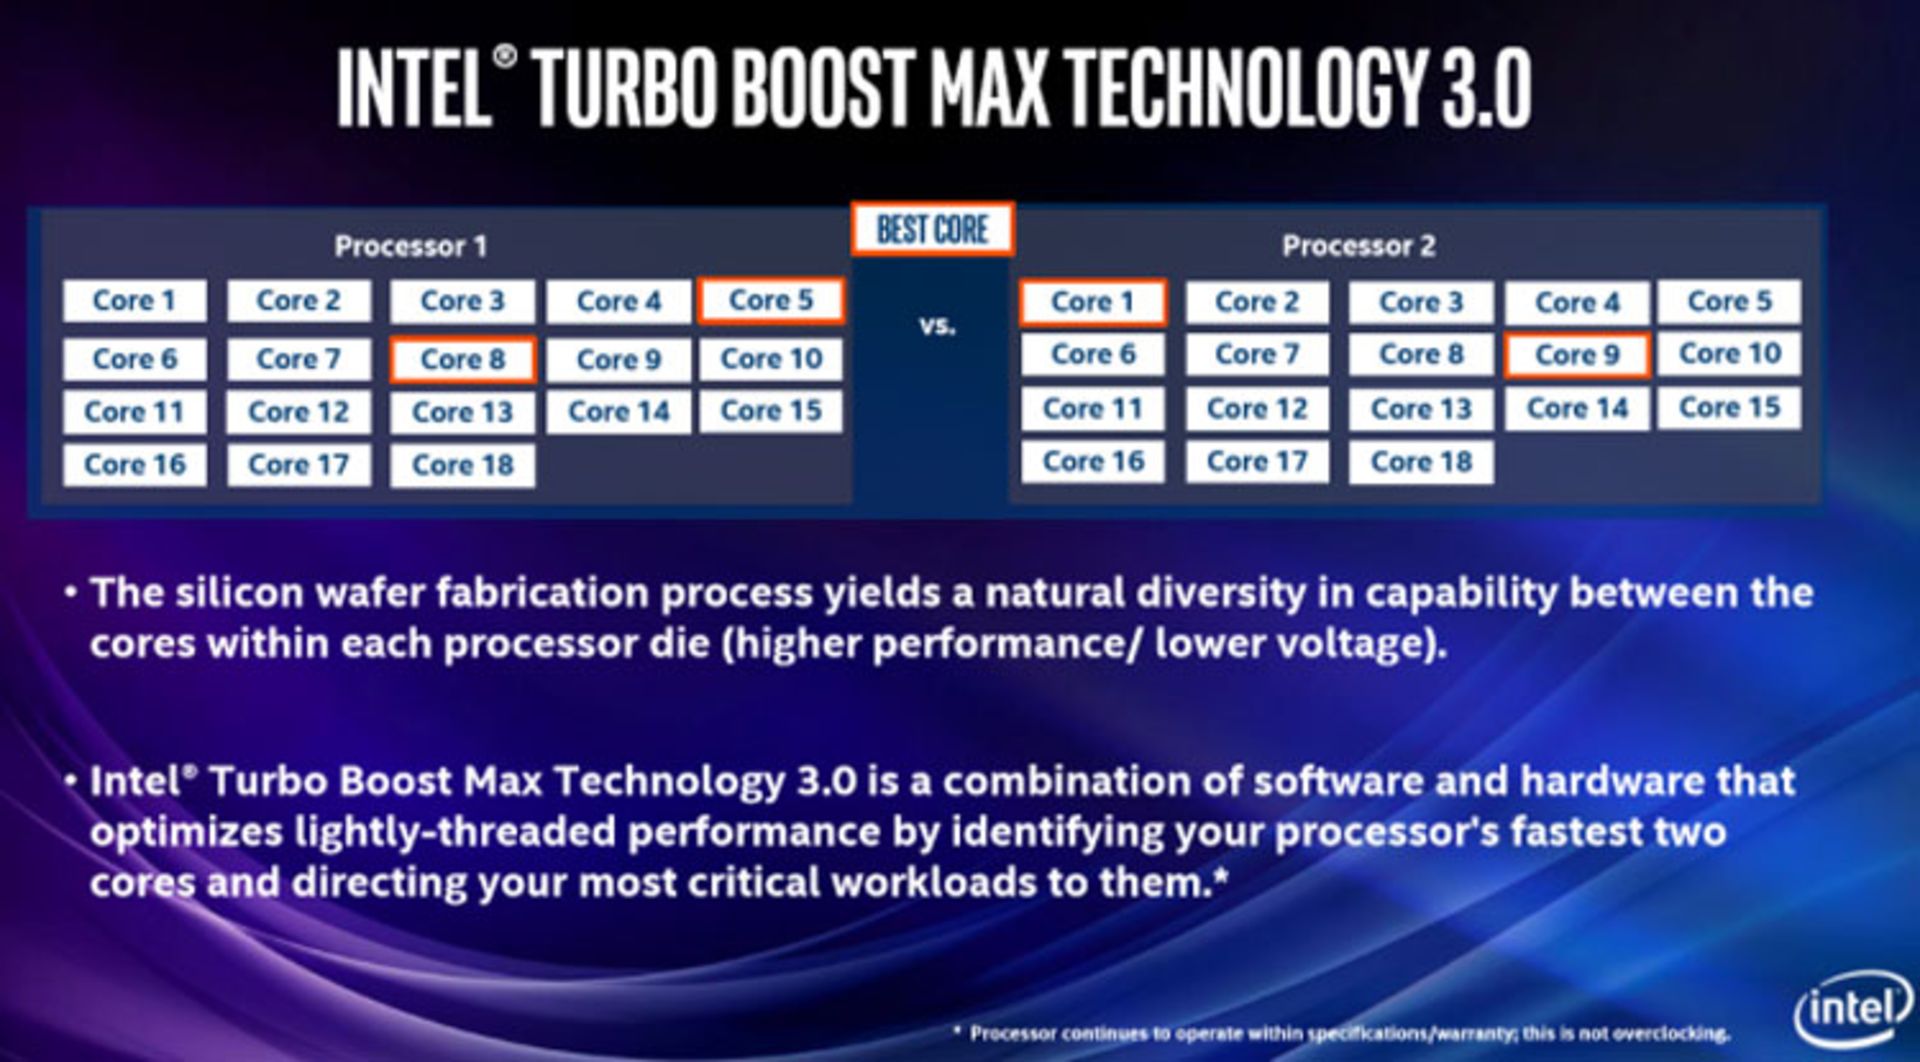 Turbo Boost Max Technology 3.0